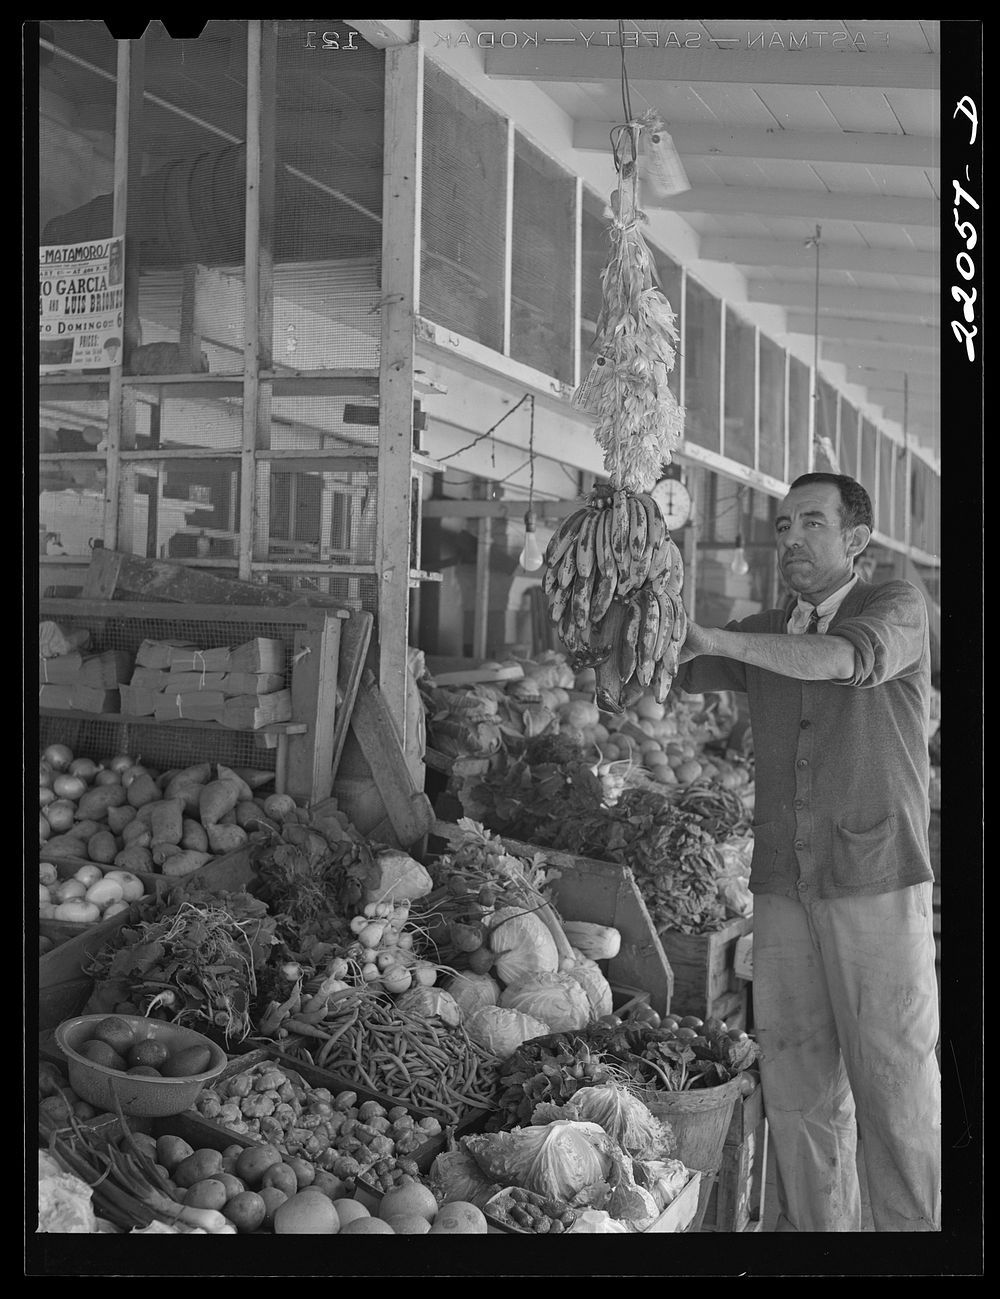 Brownsville, Texas. Mexican open air market. Sourced from the Library of Congress.